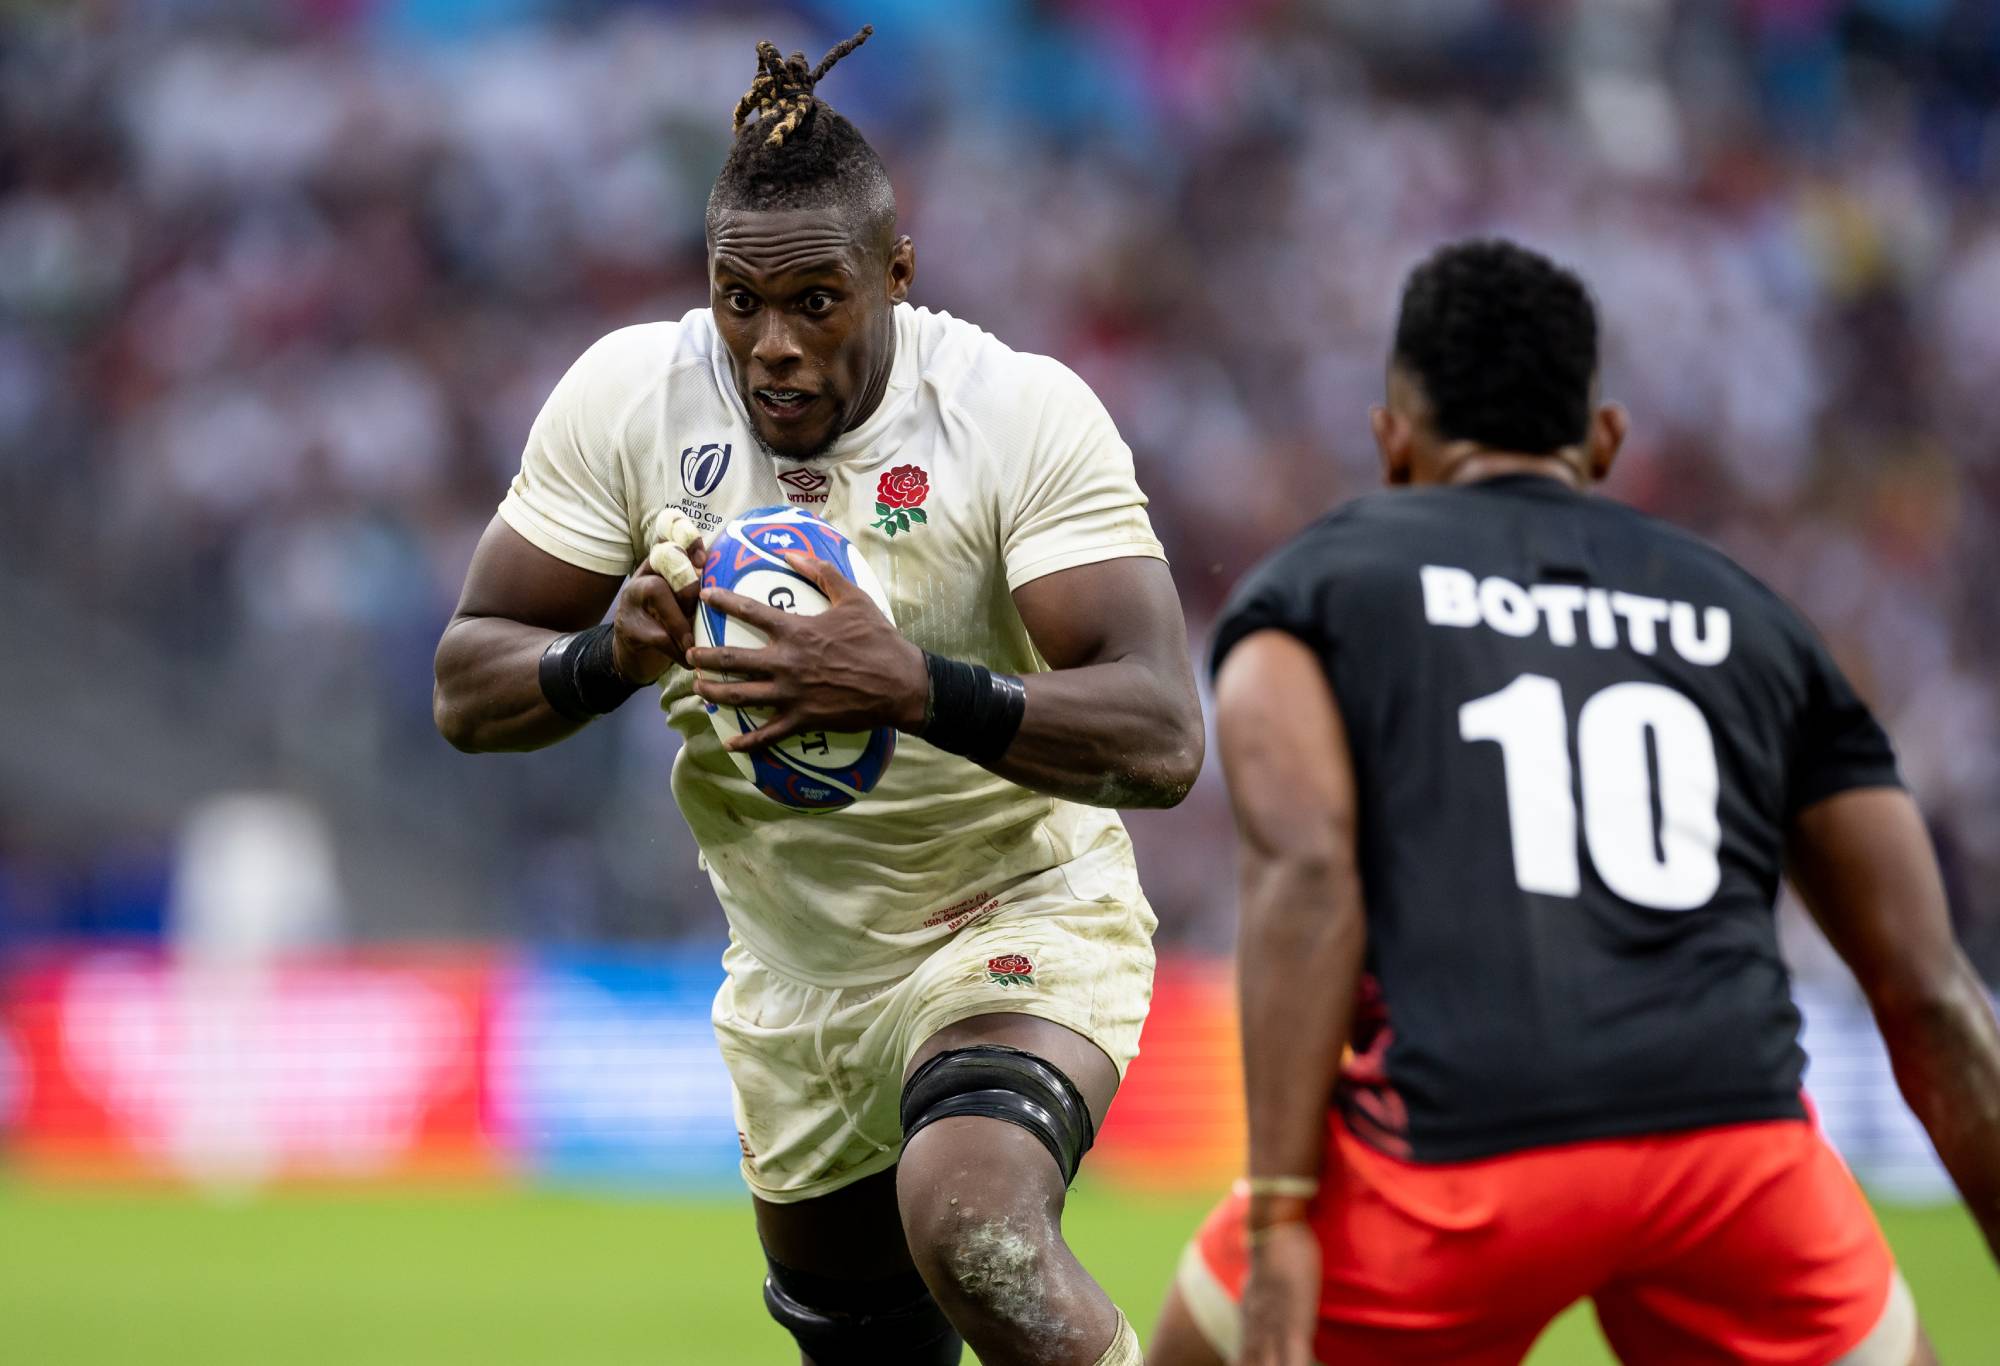 Maro Itoje of England in action during the Rugby World Cup France 2023 Quarter Final match between England and Fiji at Stade Velodrome on October 15, 2023 in Marseille, France. (Photo by Gaspafotos/MB Media/Getty Images)